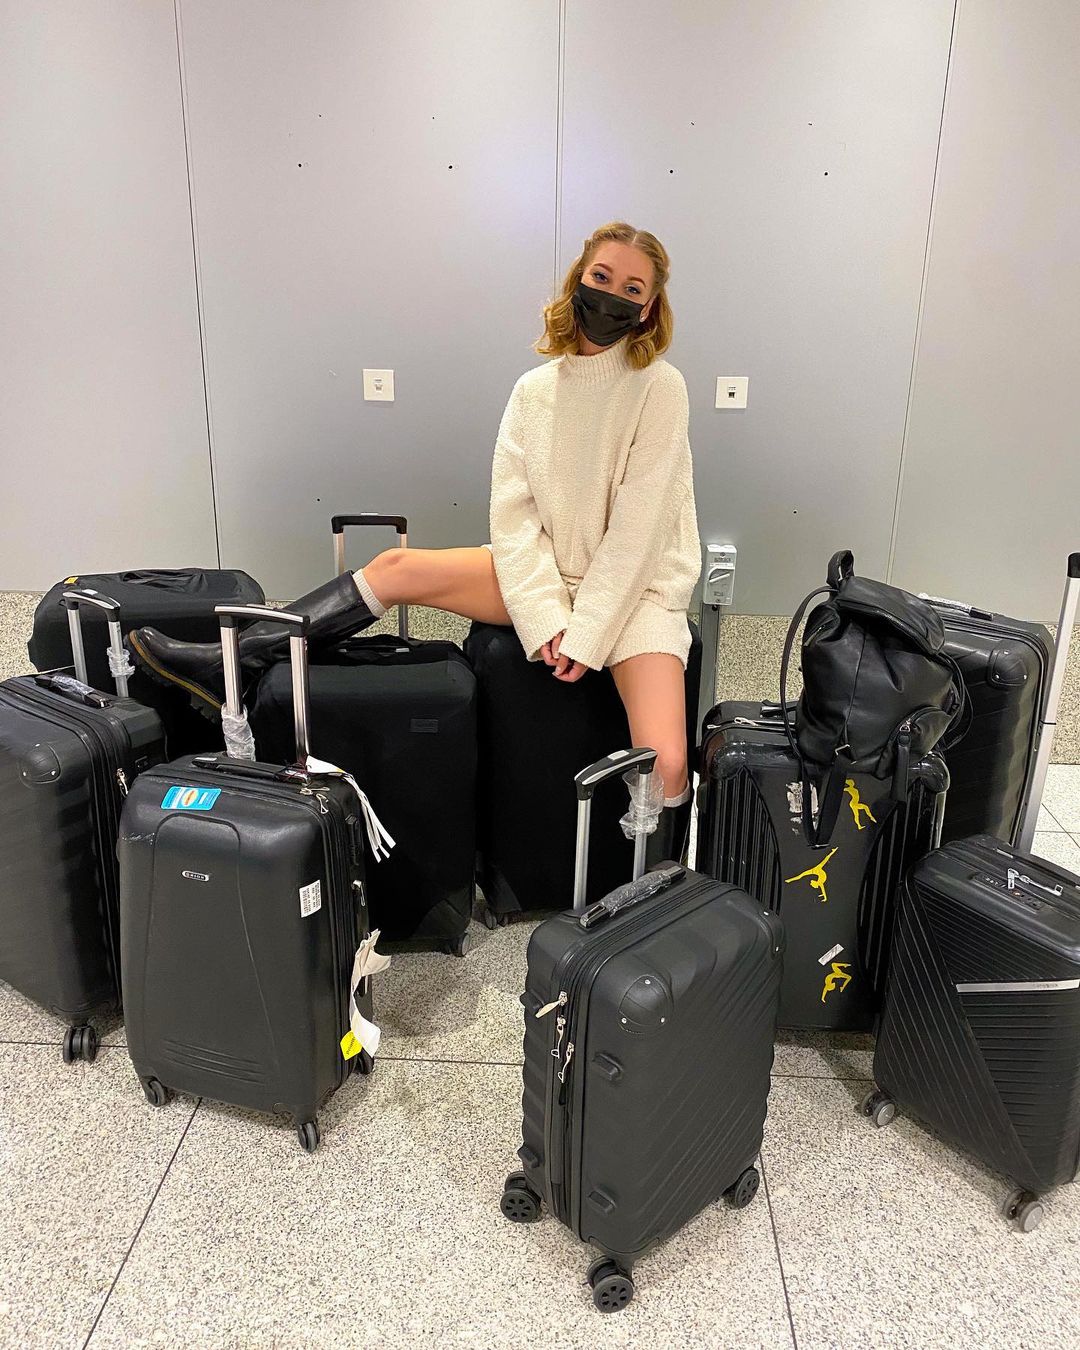 Christina Asmus could not fly from Dubai due to numerous suitcases